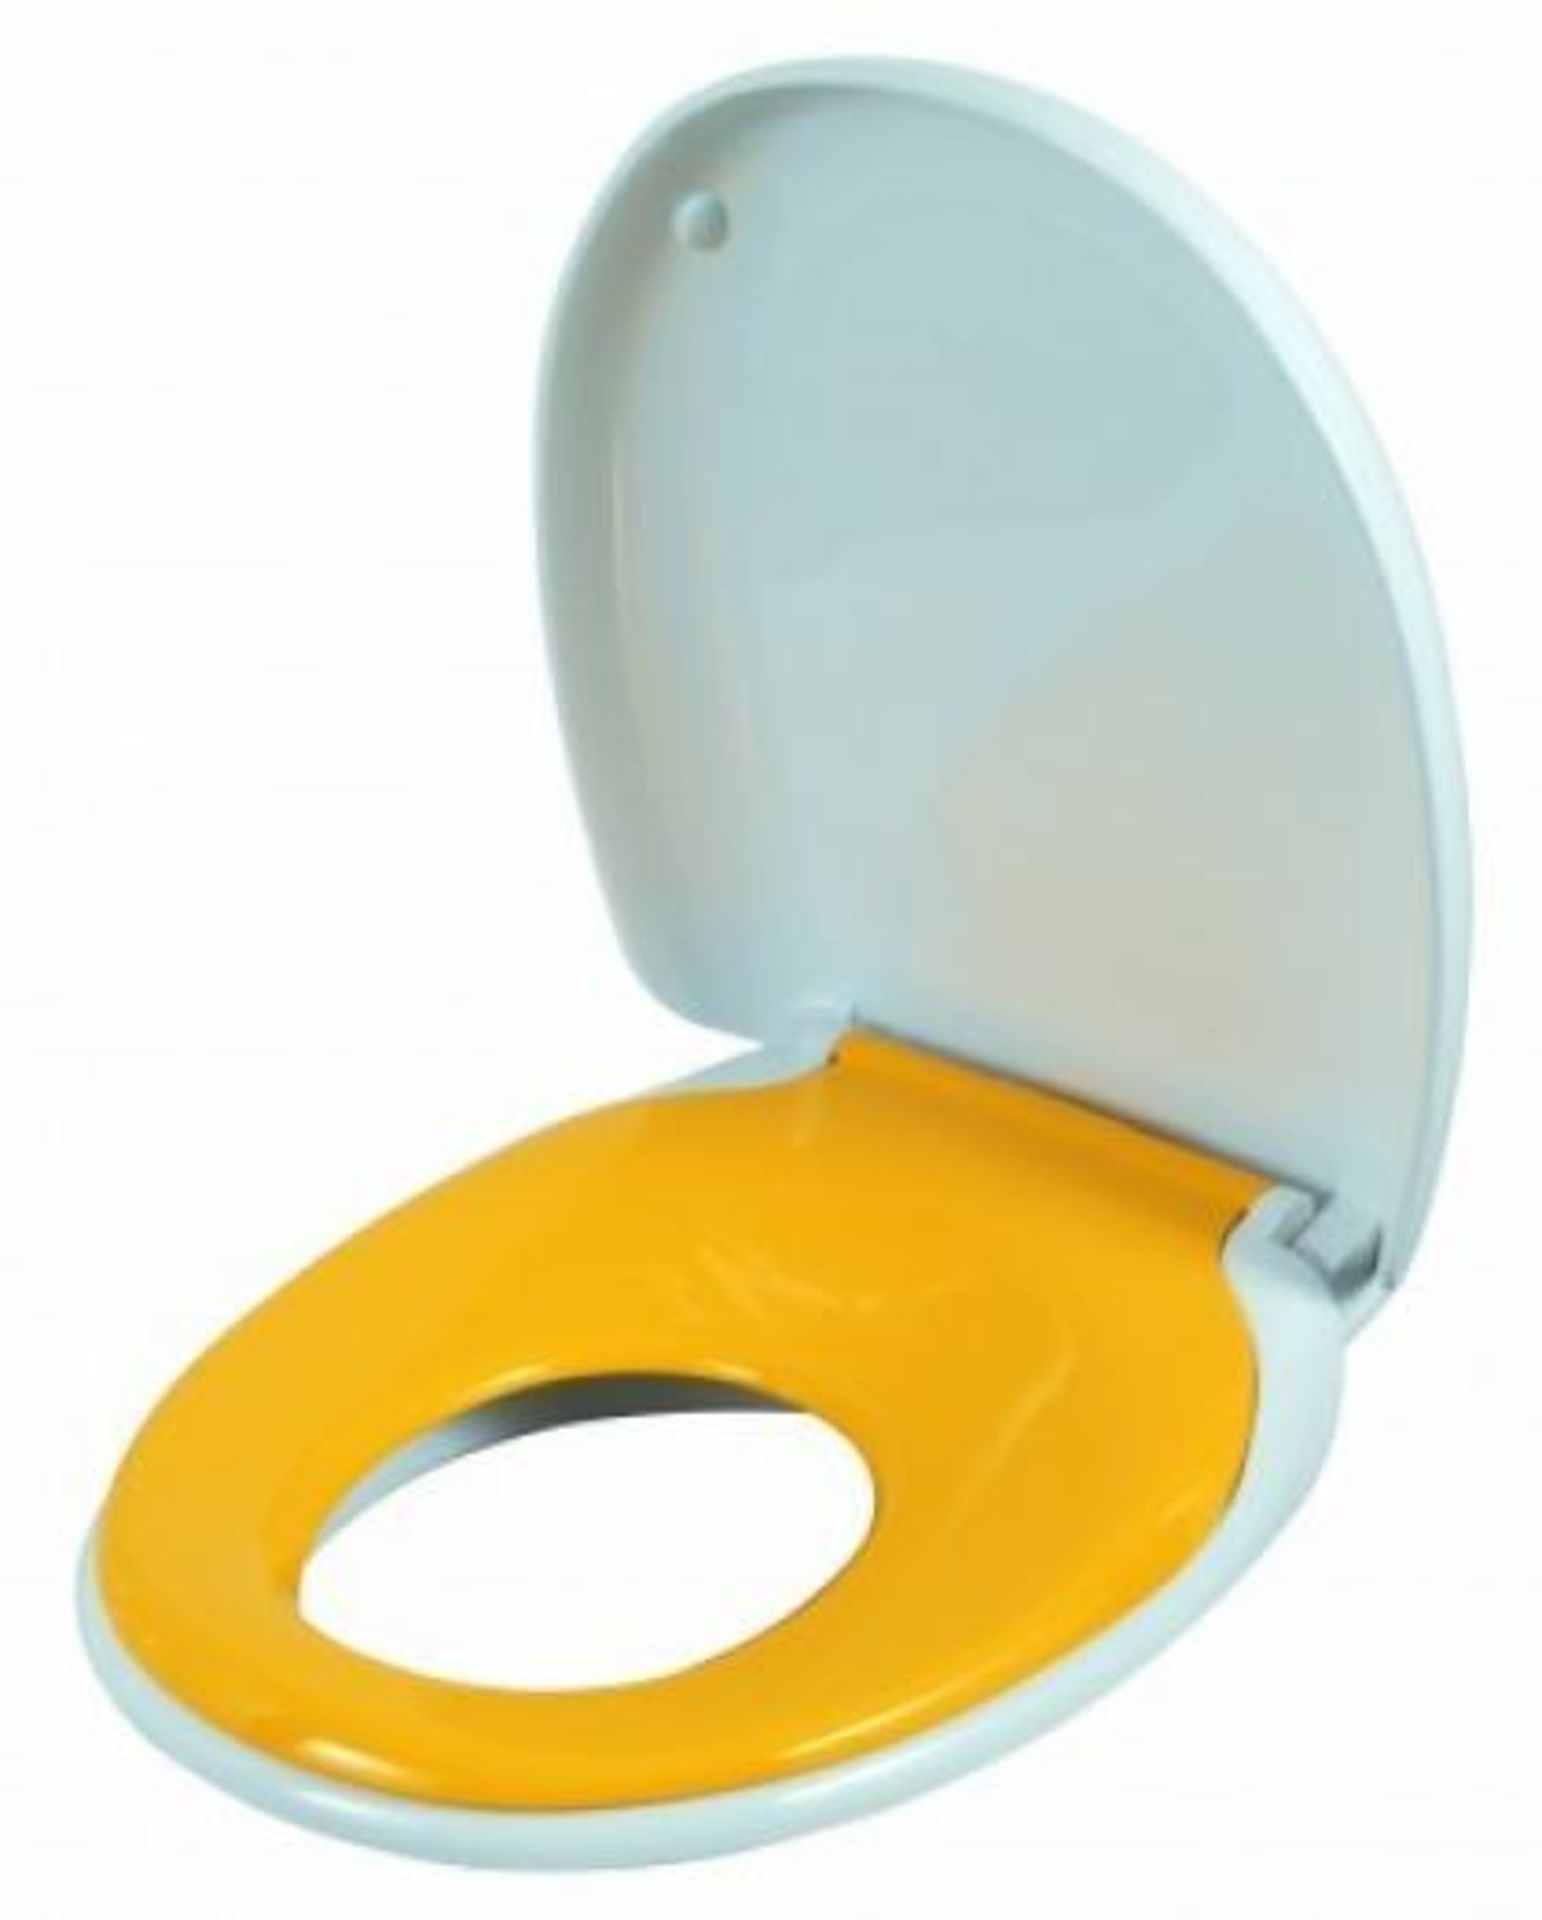 1 x Dubaloo 2 in 1 Family Training Toilet Seat - One Seat For All The Family - Full Size Toilet Seat - Image 5 of 7